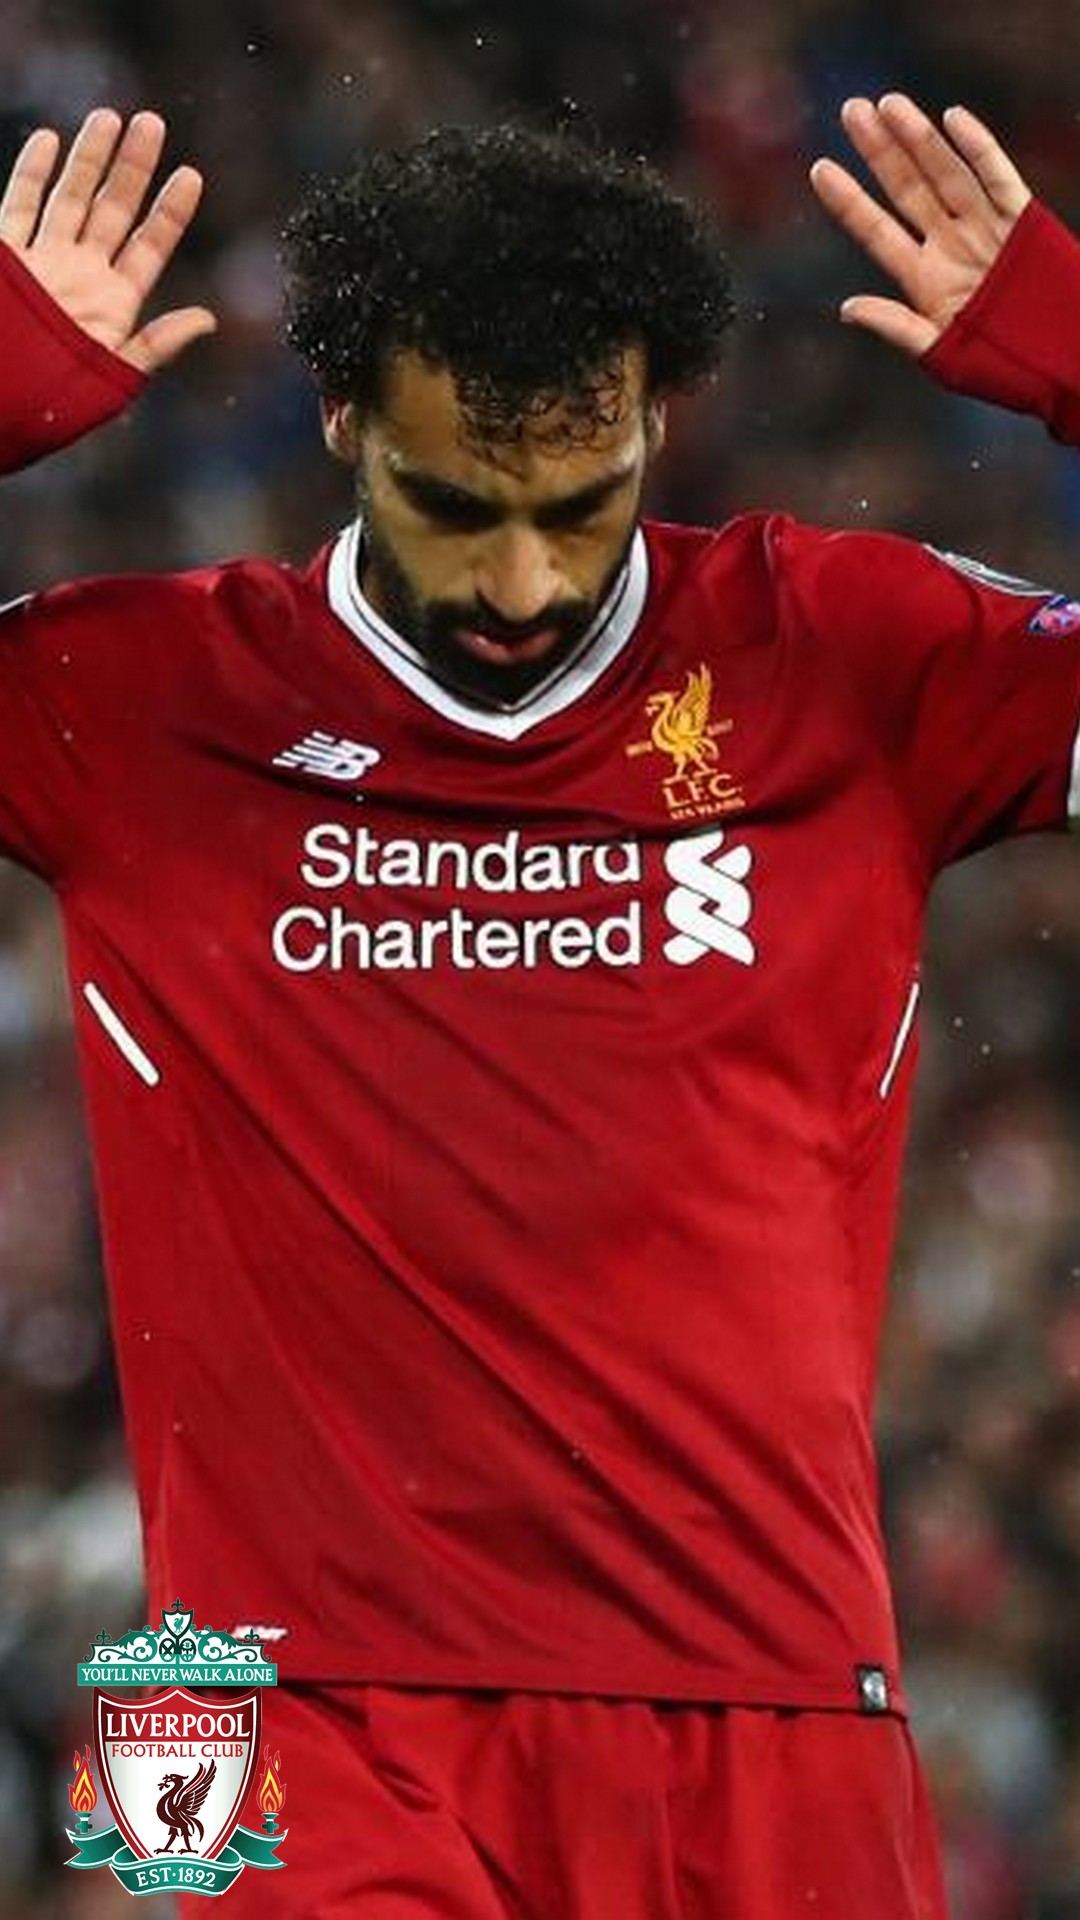 Liverpool Mohamed Salah iPhone Wallpaper with resolution 1080X1920 pixel. You can make this wallpaper for your iPhone 5, 6, 7, 8, X backgrounds, Mobile Screensaver, or iPad Lock Screen